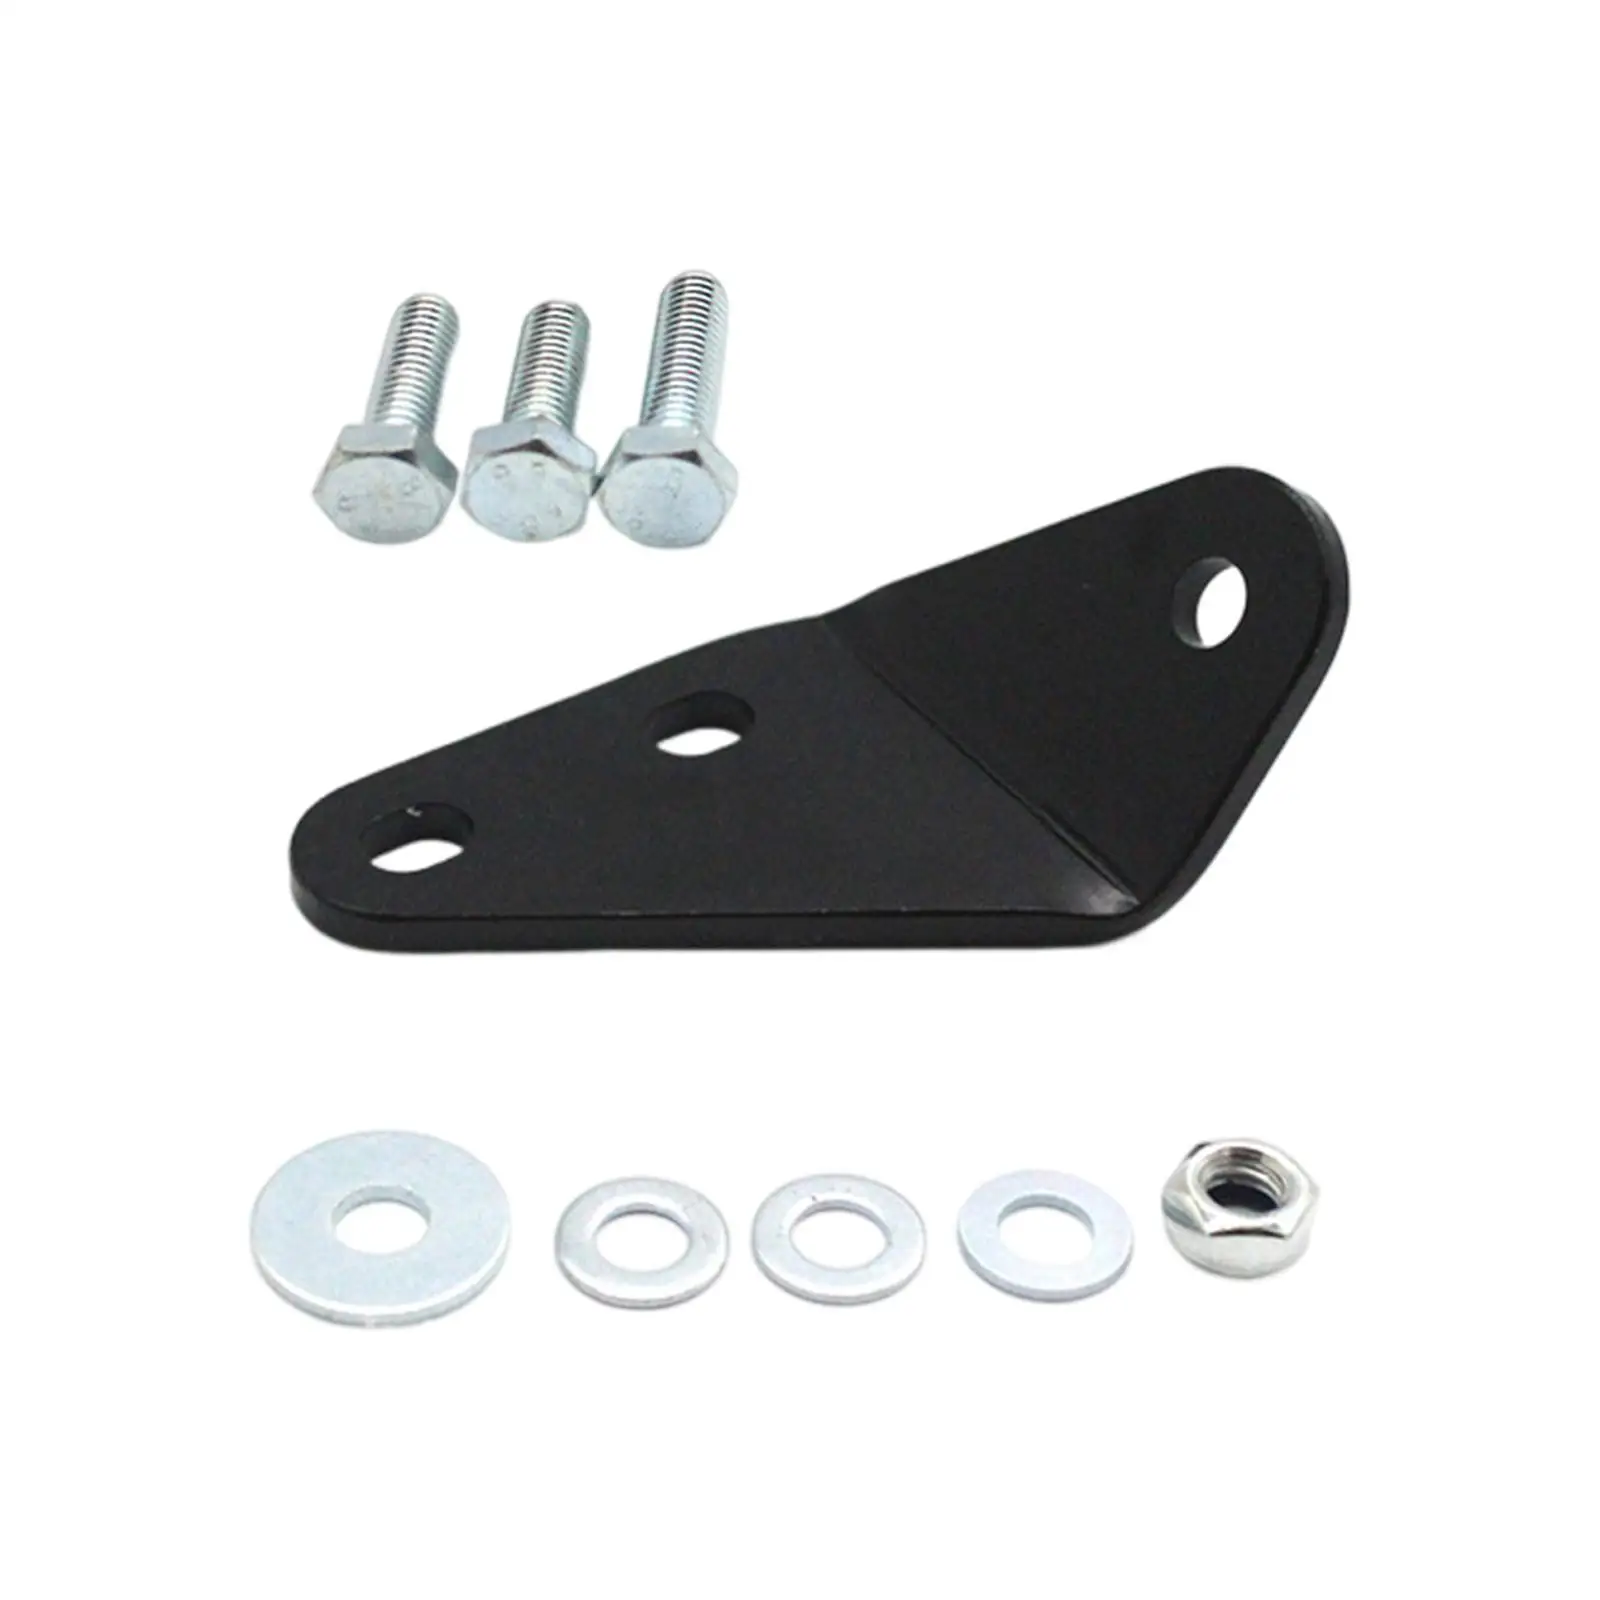 Clutch Pedal Repair Bracket Set Metal Easy Installation Directly Replace Durable for VW T4 Transporter Multivan Accessories